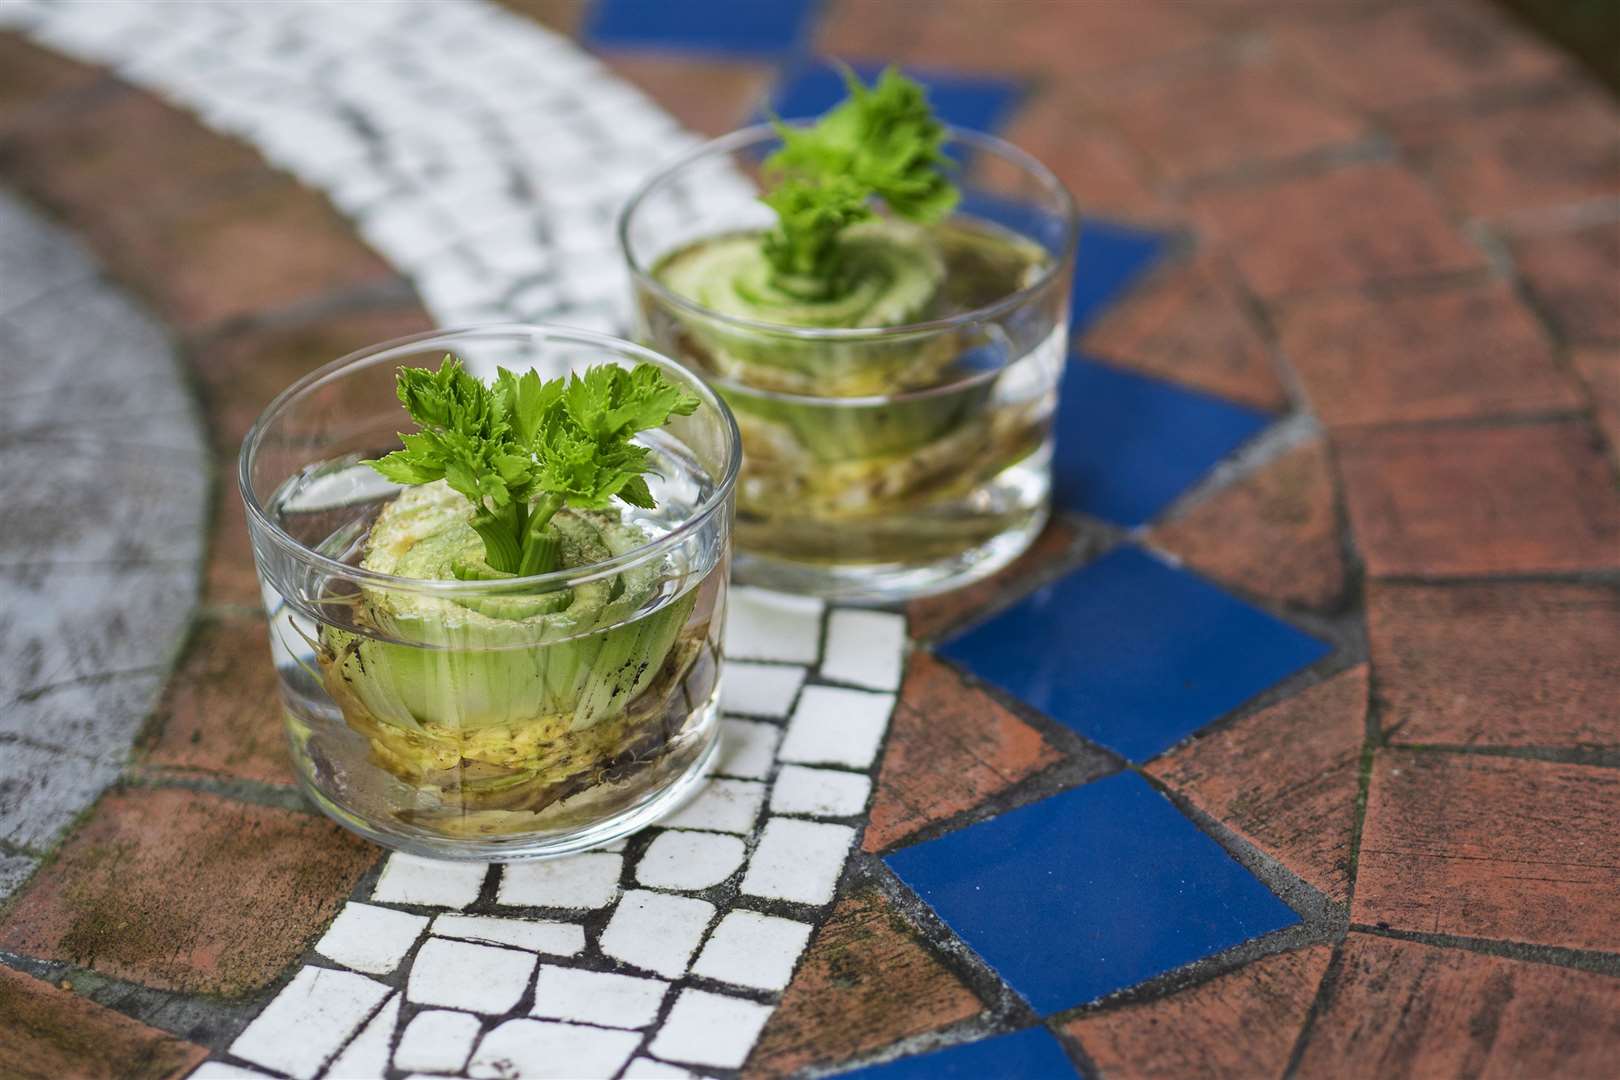 Try regrowing celery in your kitchen. Picture: iStock/PA